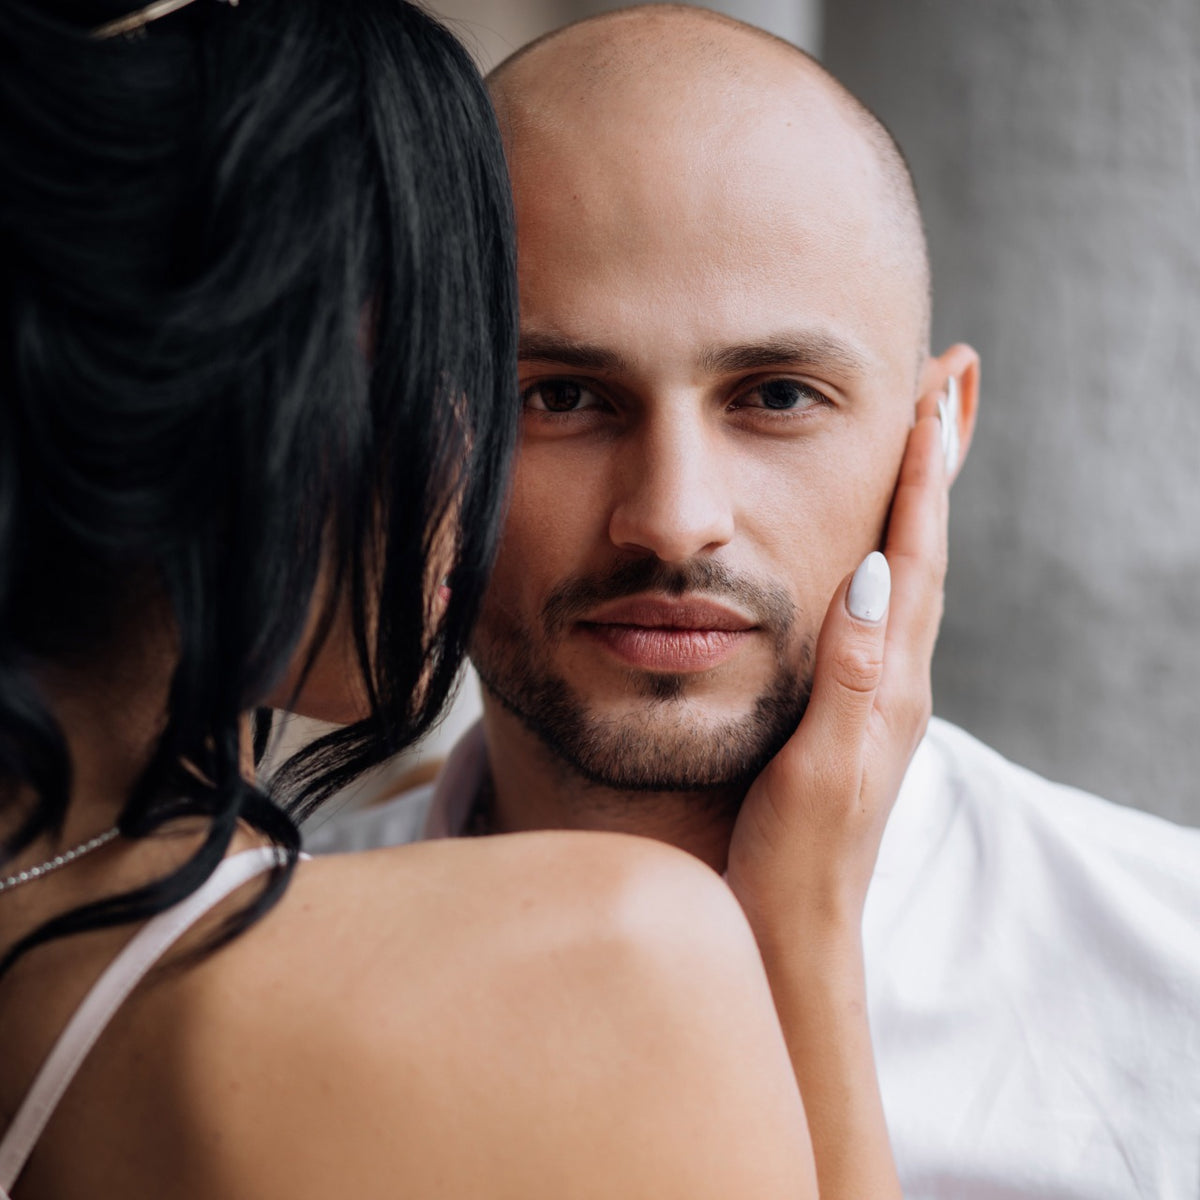 Dating A Bald Guy The Pros And Cons [2023 Reliable Research] Skull Shaver Euro